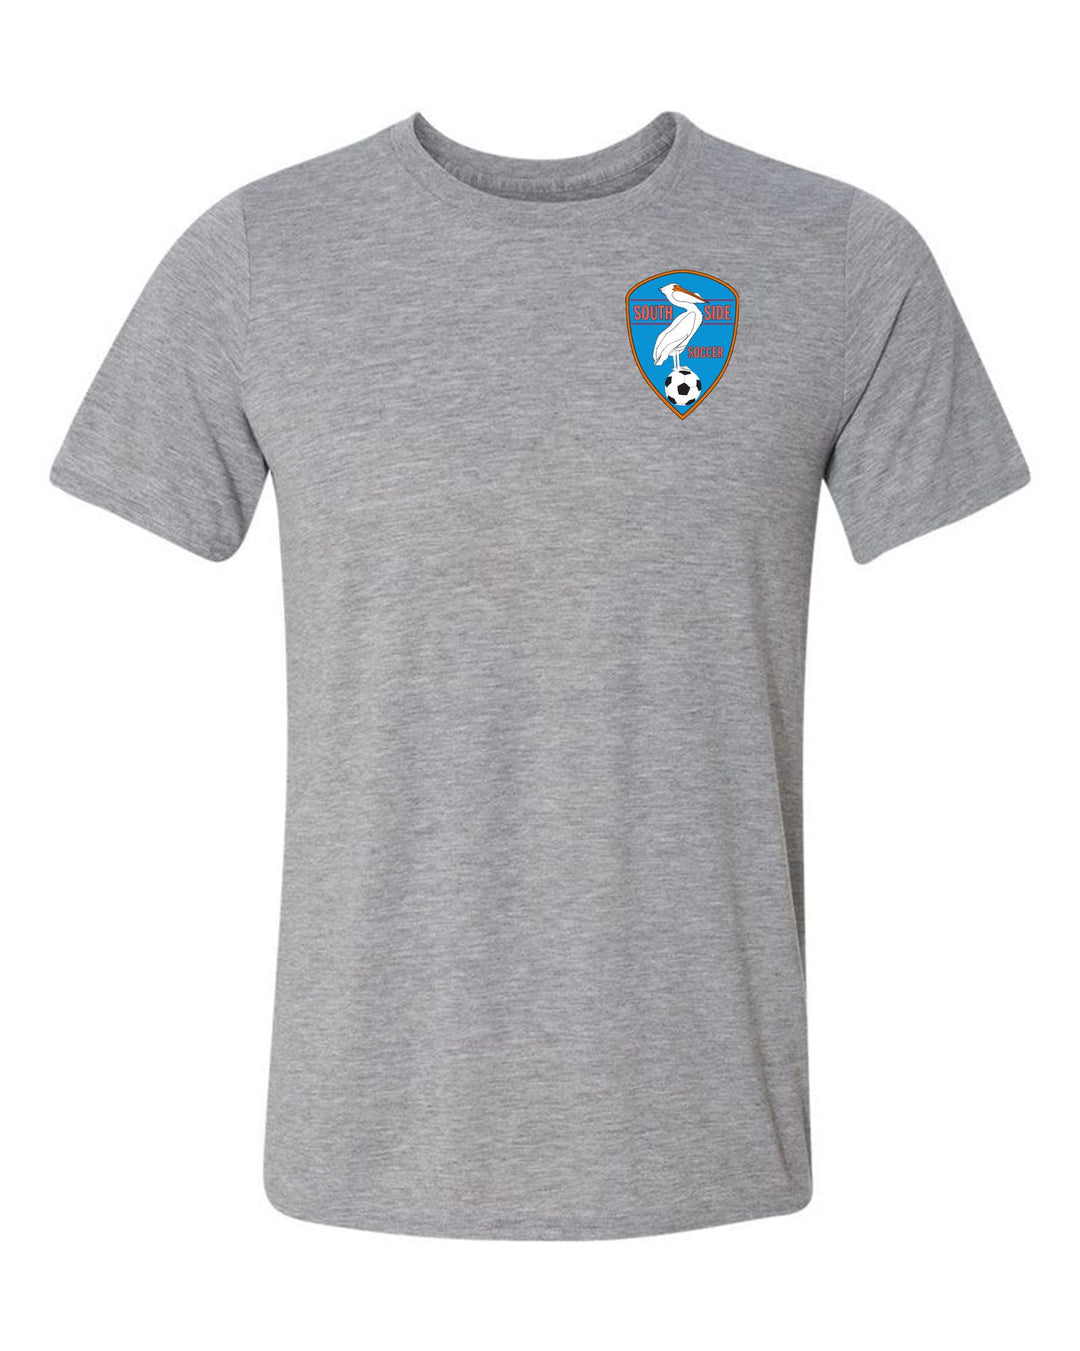 Southside Youth Soccer Short Sleeve T-Shirt SYS Spiritwear SPORT GREY YOUTH SMALL - Third Coast Soccer